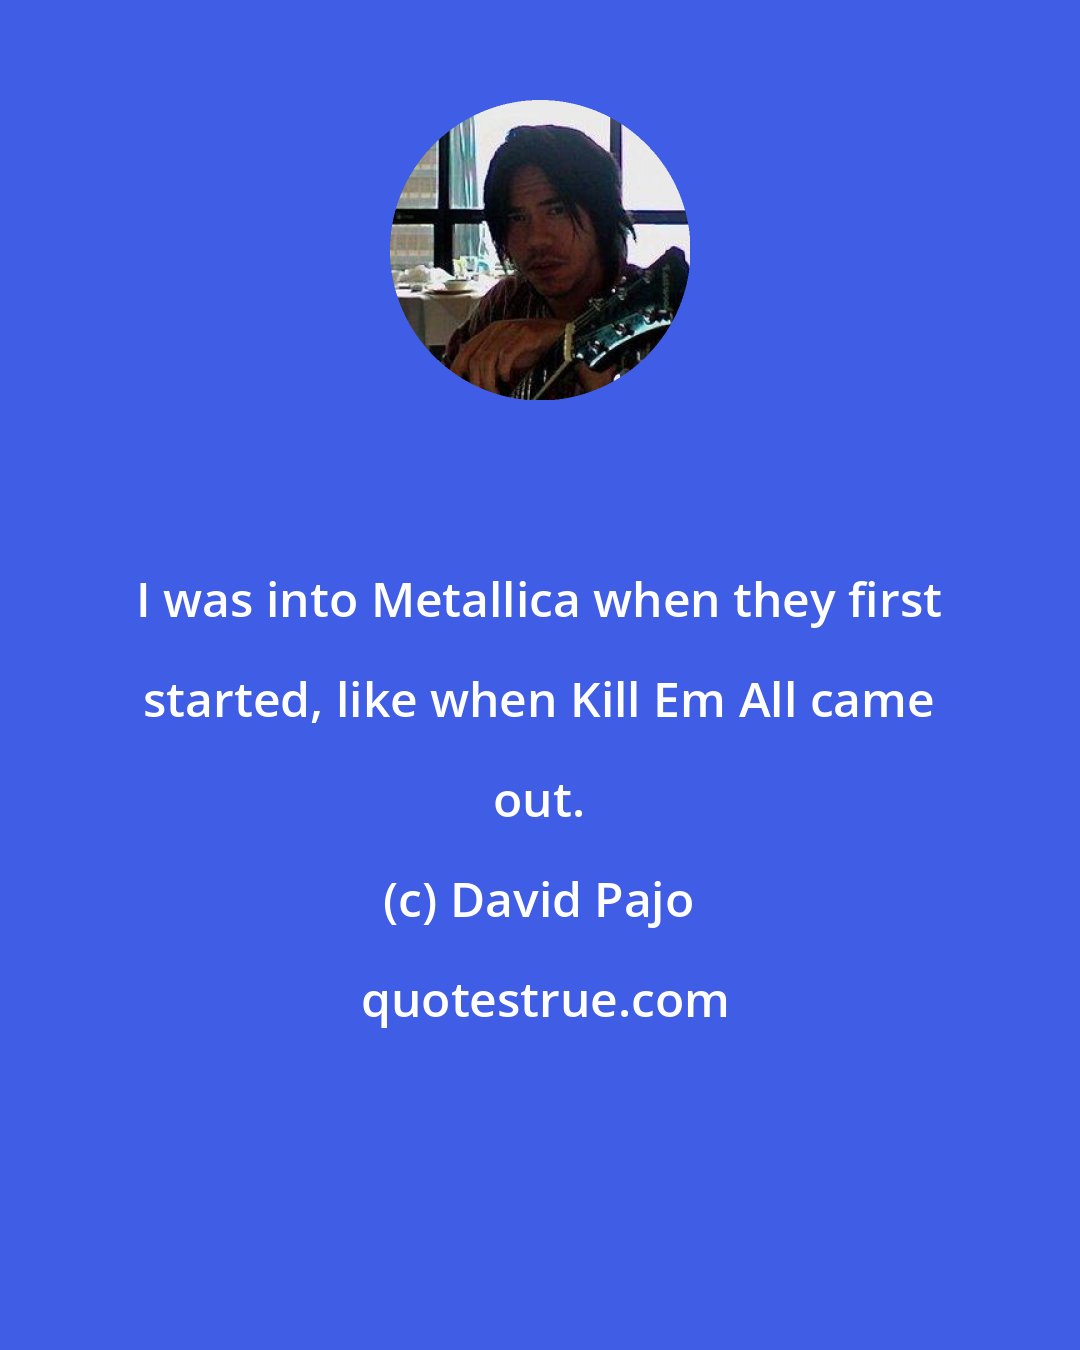 David Pajo: I was into Metallica when they first started, like when Kill Em All came out.